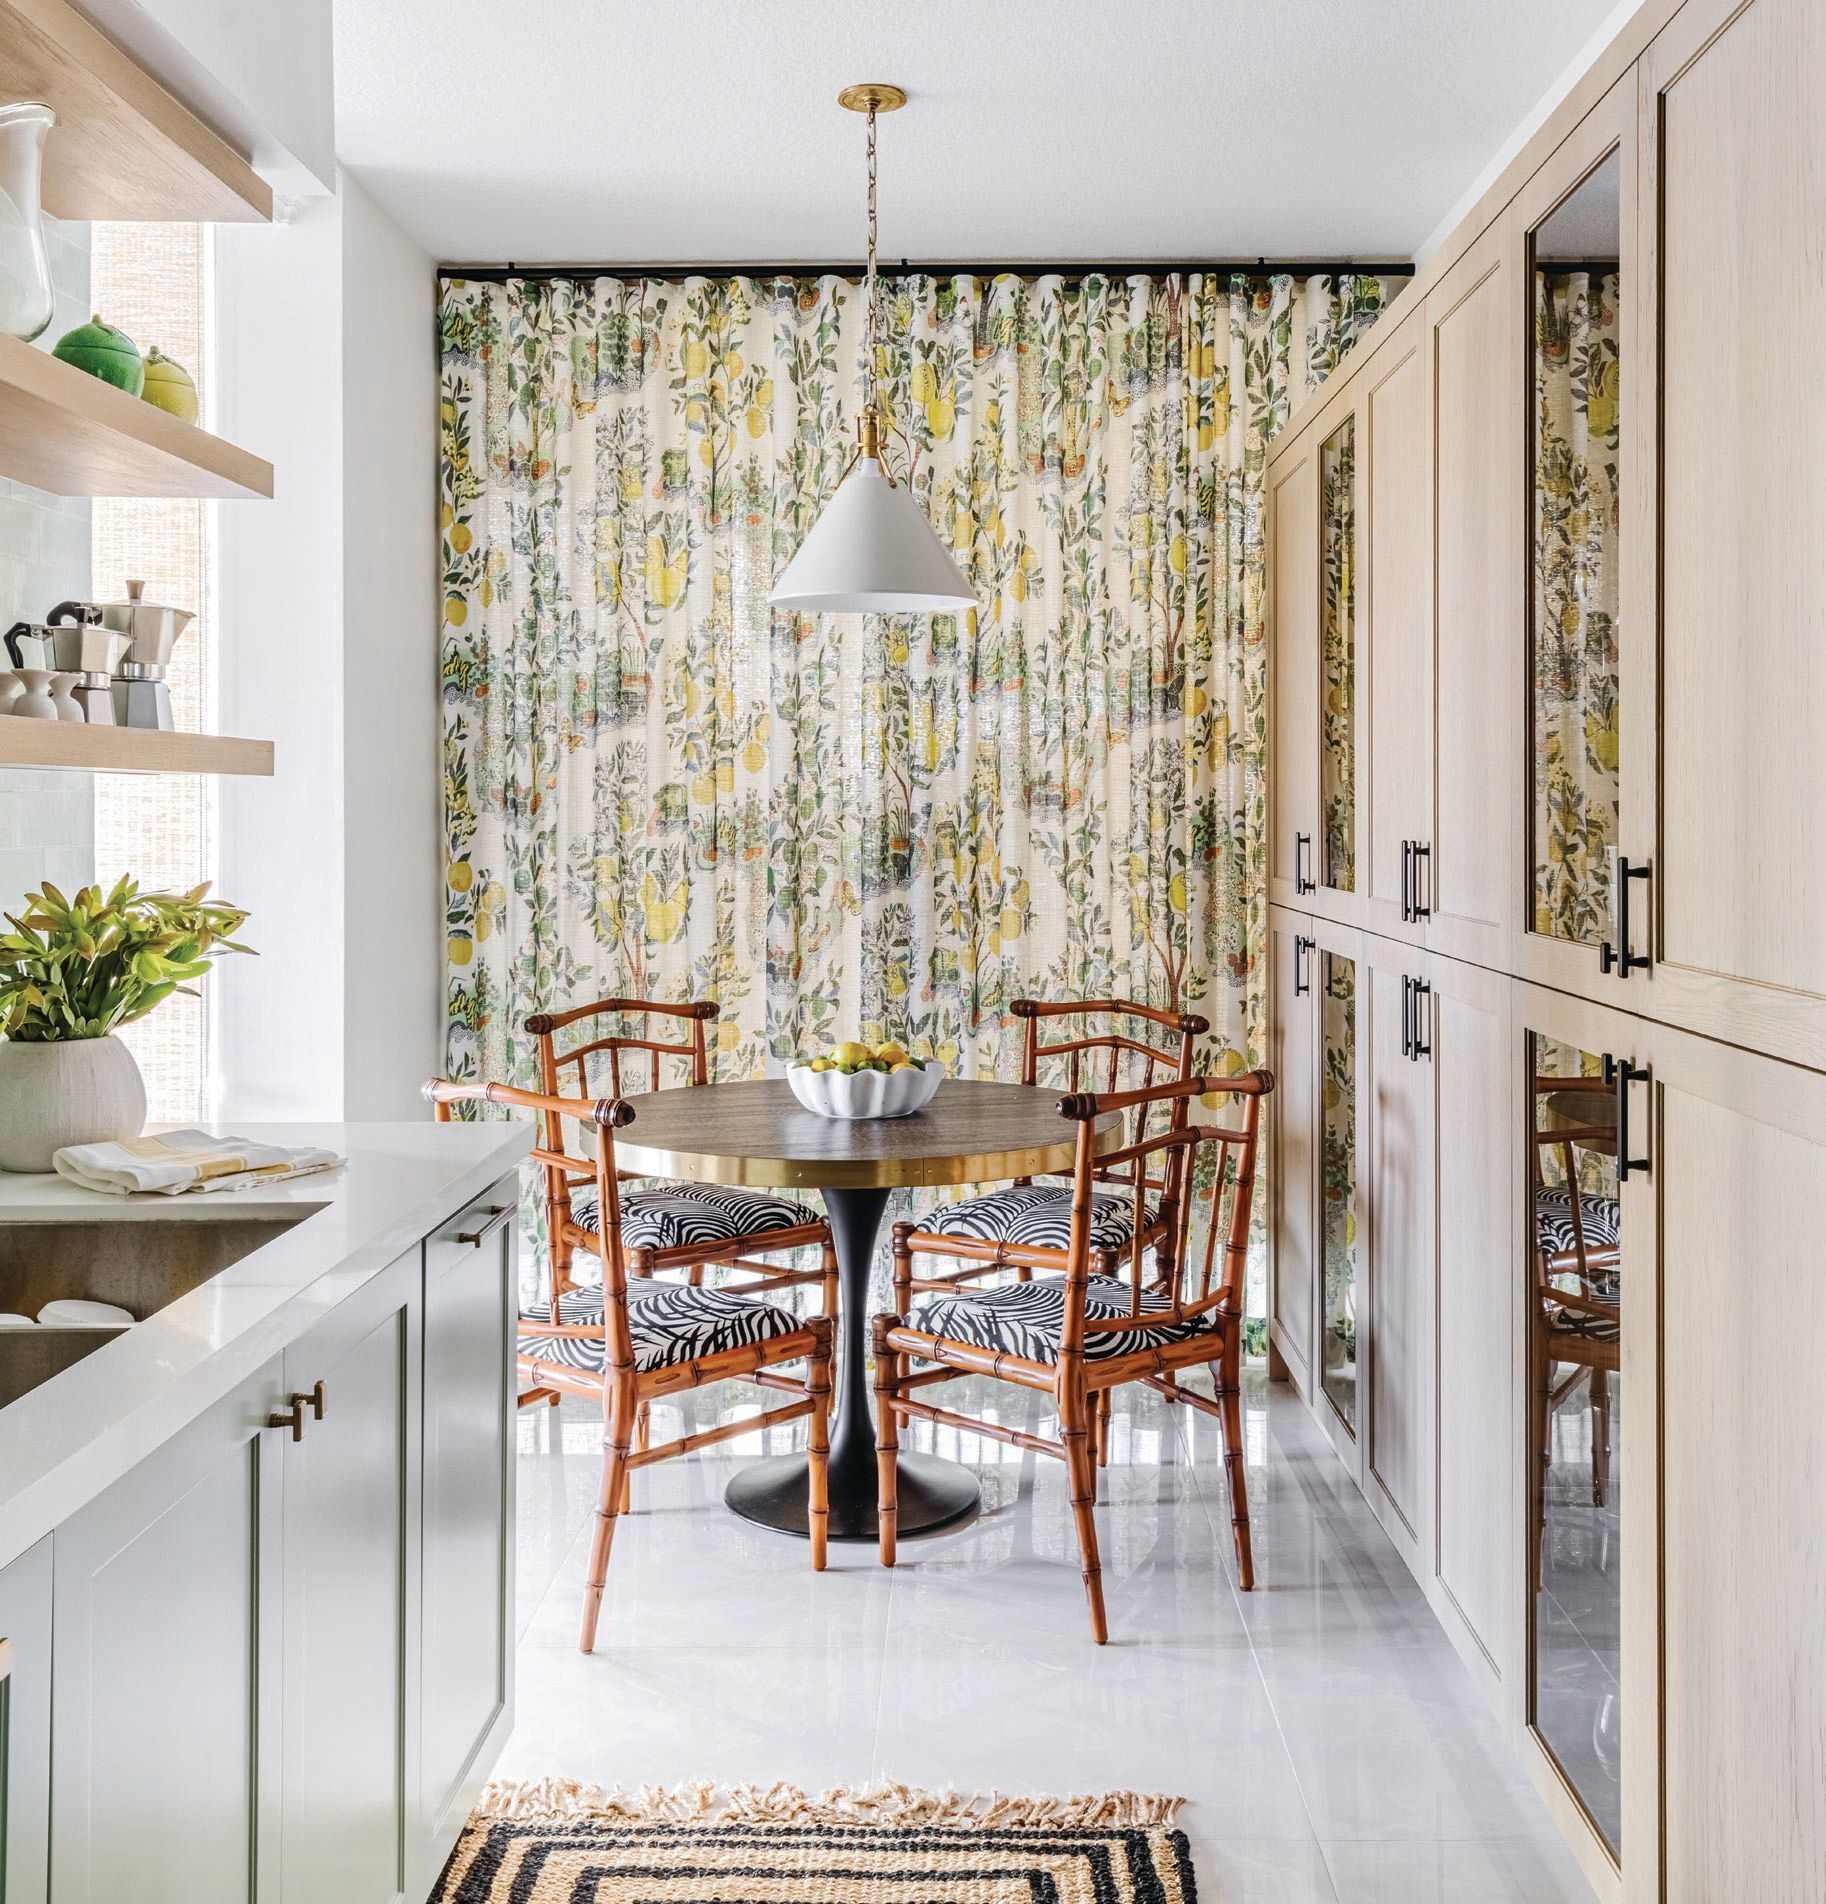 Dainty bamboo chairs fitted with Iconic zebra fabric juxtapose Citrus Garden linen draperies in the kitchen—both prints from Schumacher (schumacher.com). “The joyful color mix in these textiles perfectly complements the pastel cabinetry, hewn brass hardware and black powder-coated fixtures,” says designer Sabrina Albanese. PHOTO BY JEANNE CANTO